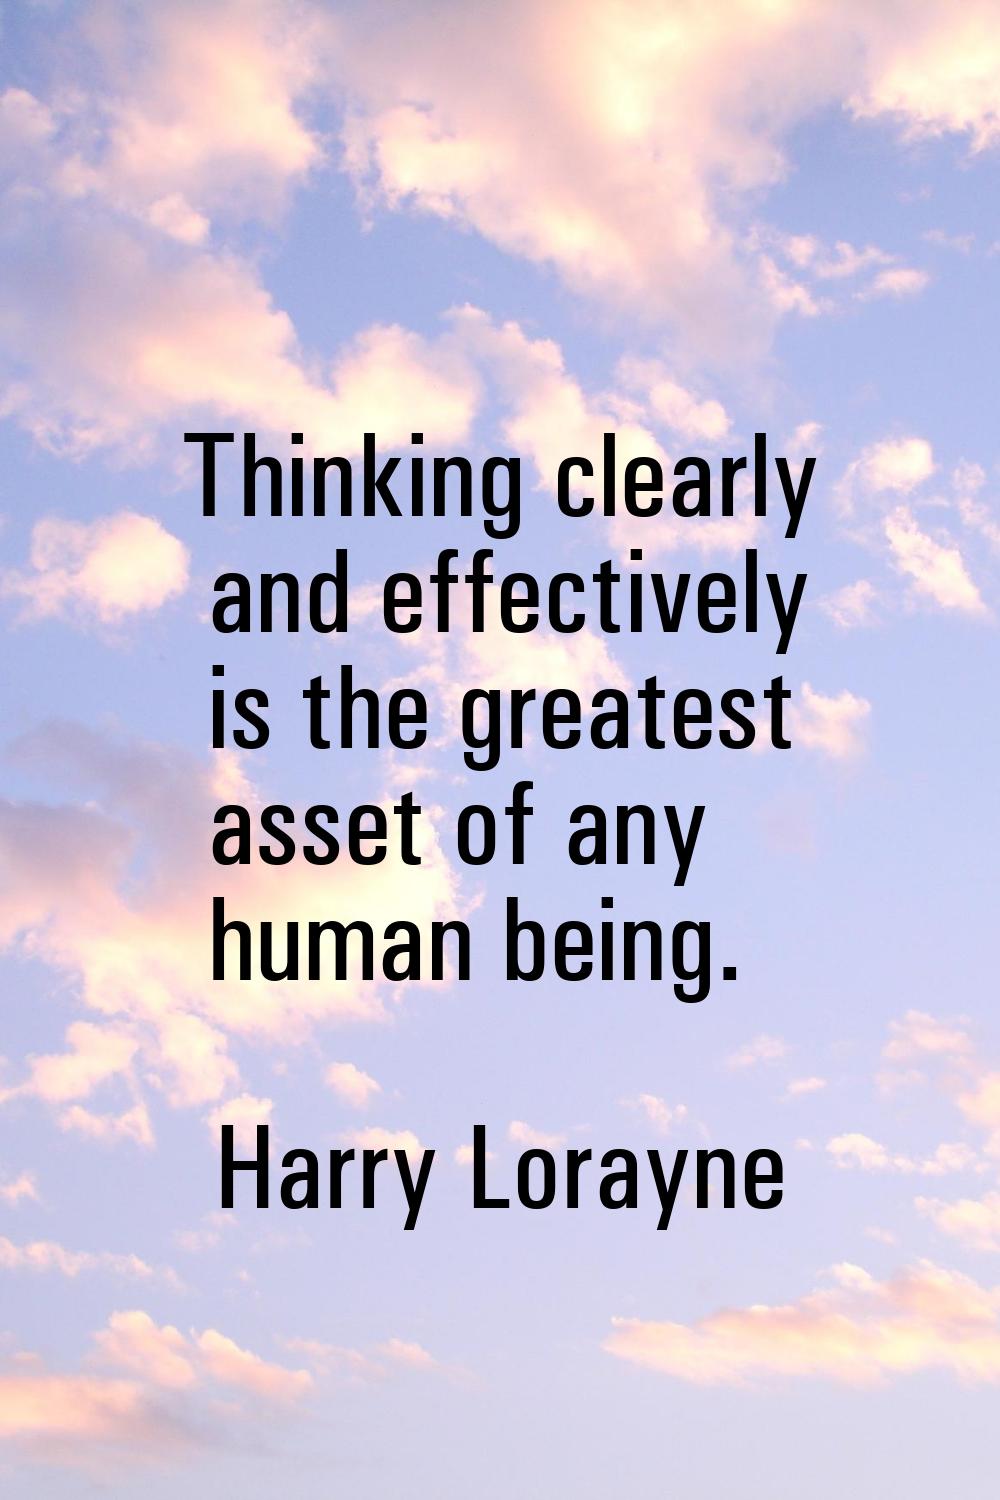 Thinking clearly and effectively is the greatest asset of any human being.